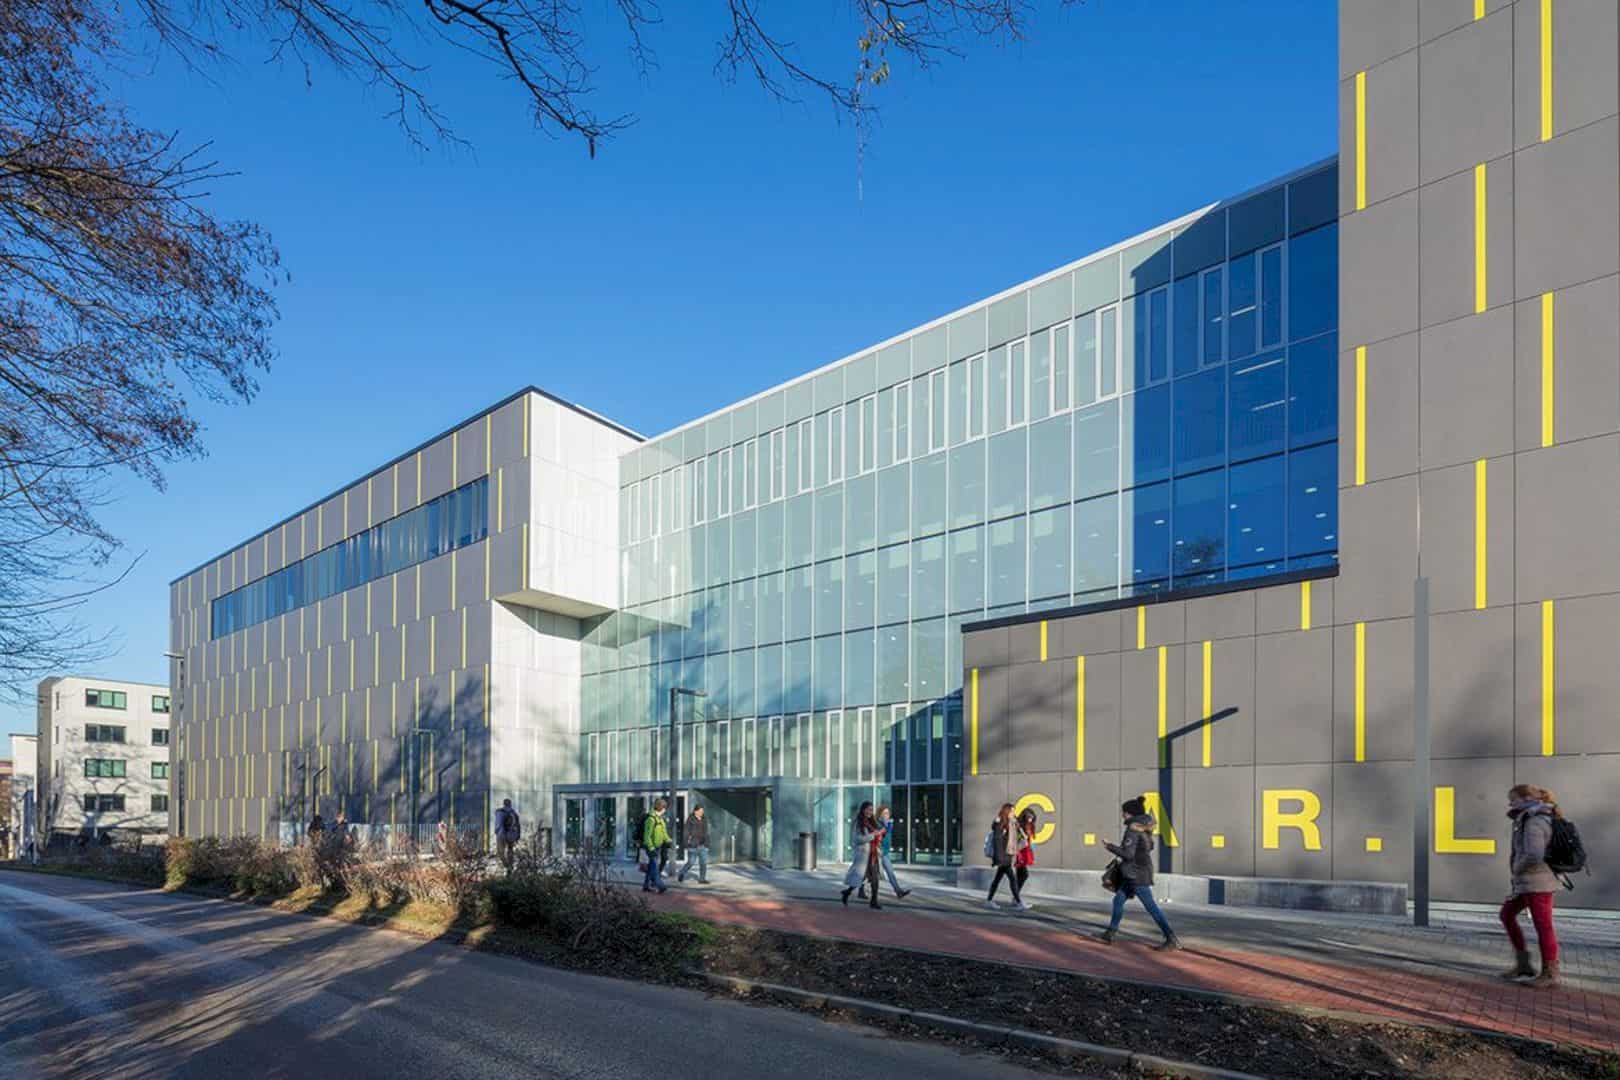 C A R L One Of The Largest And Most Modern Lecture Hall Centers In Europe 5